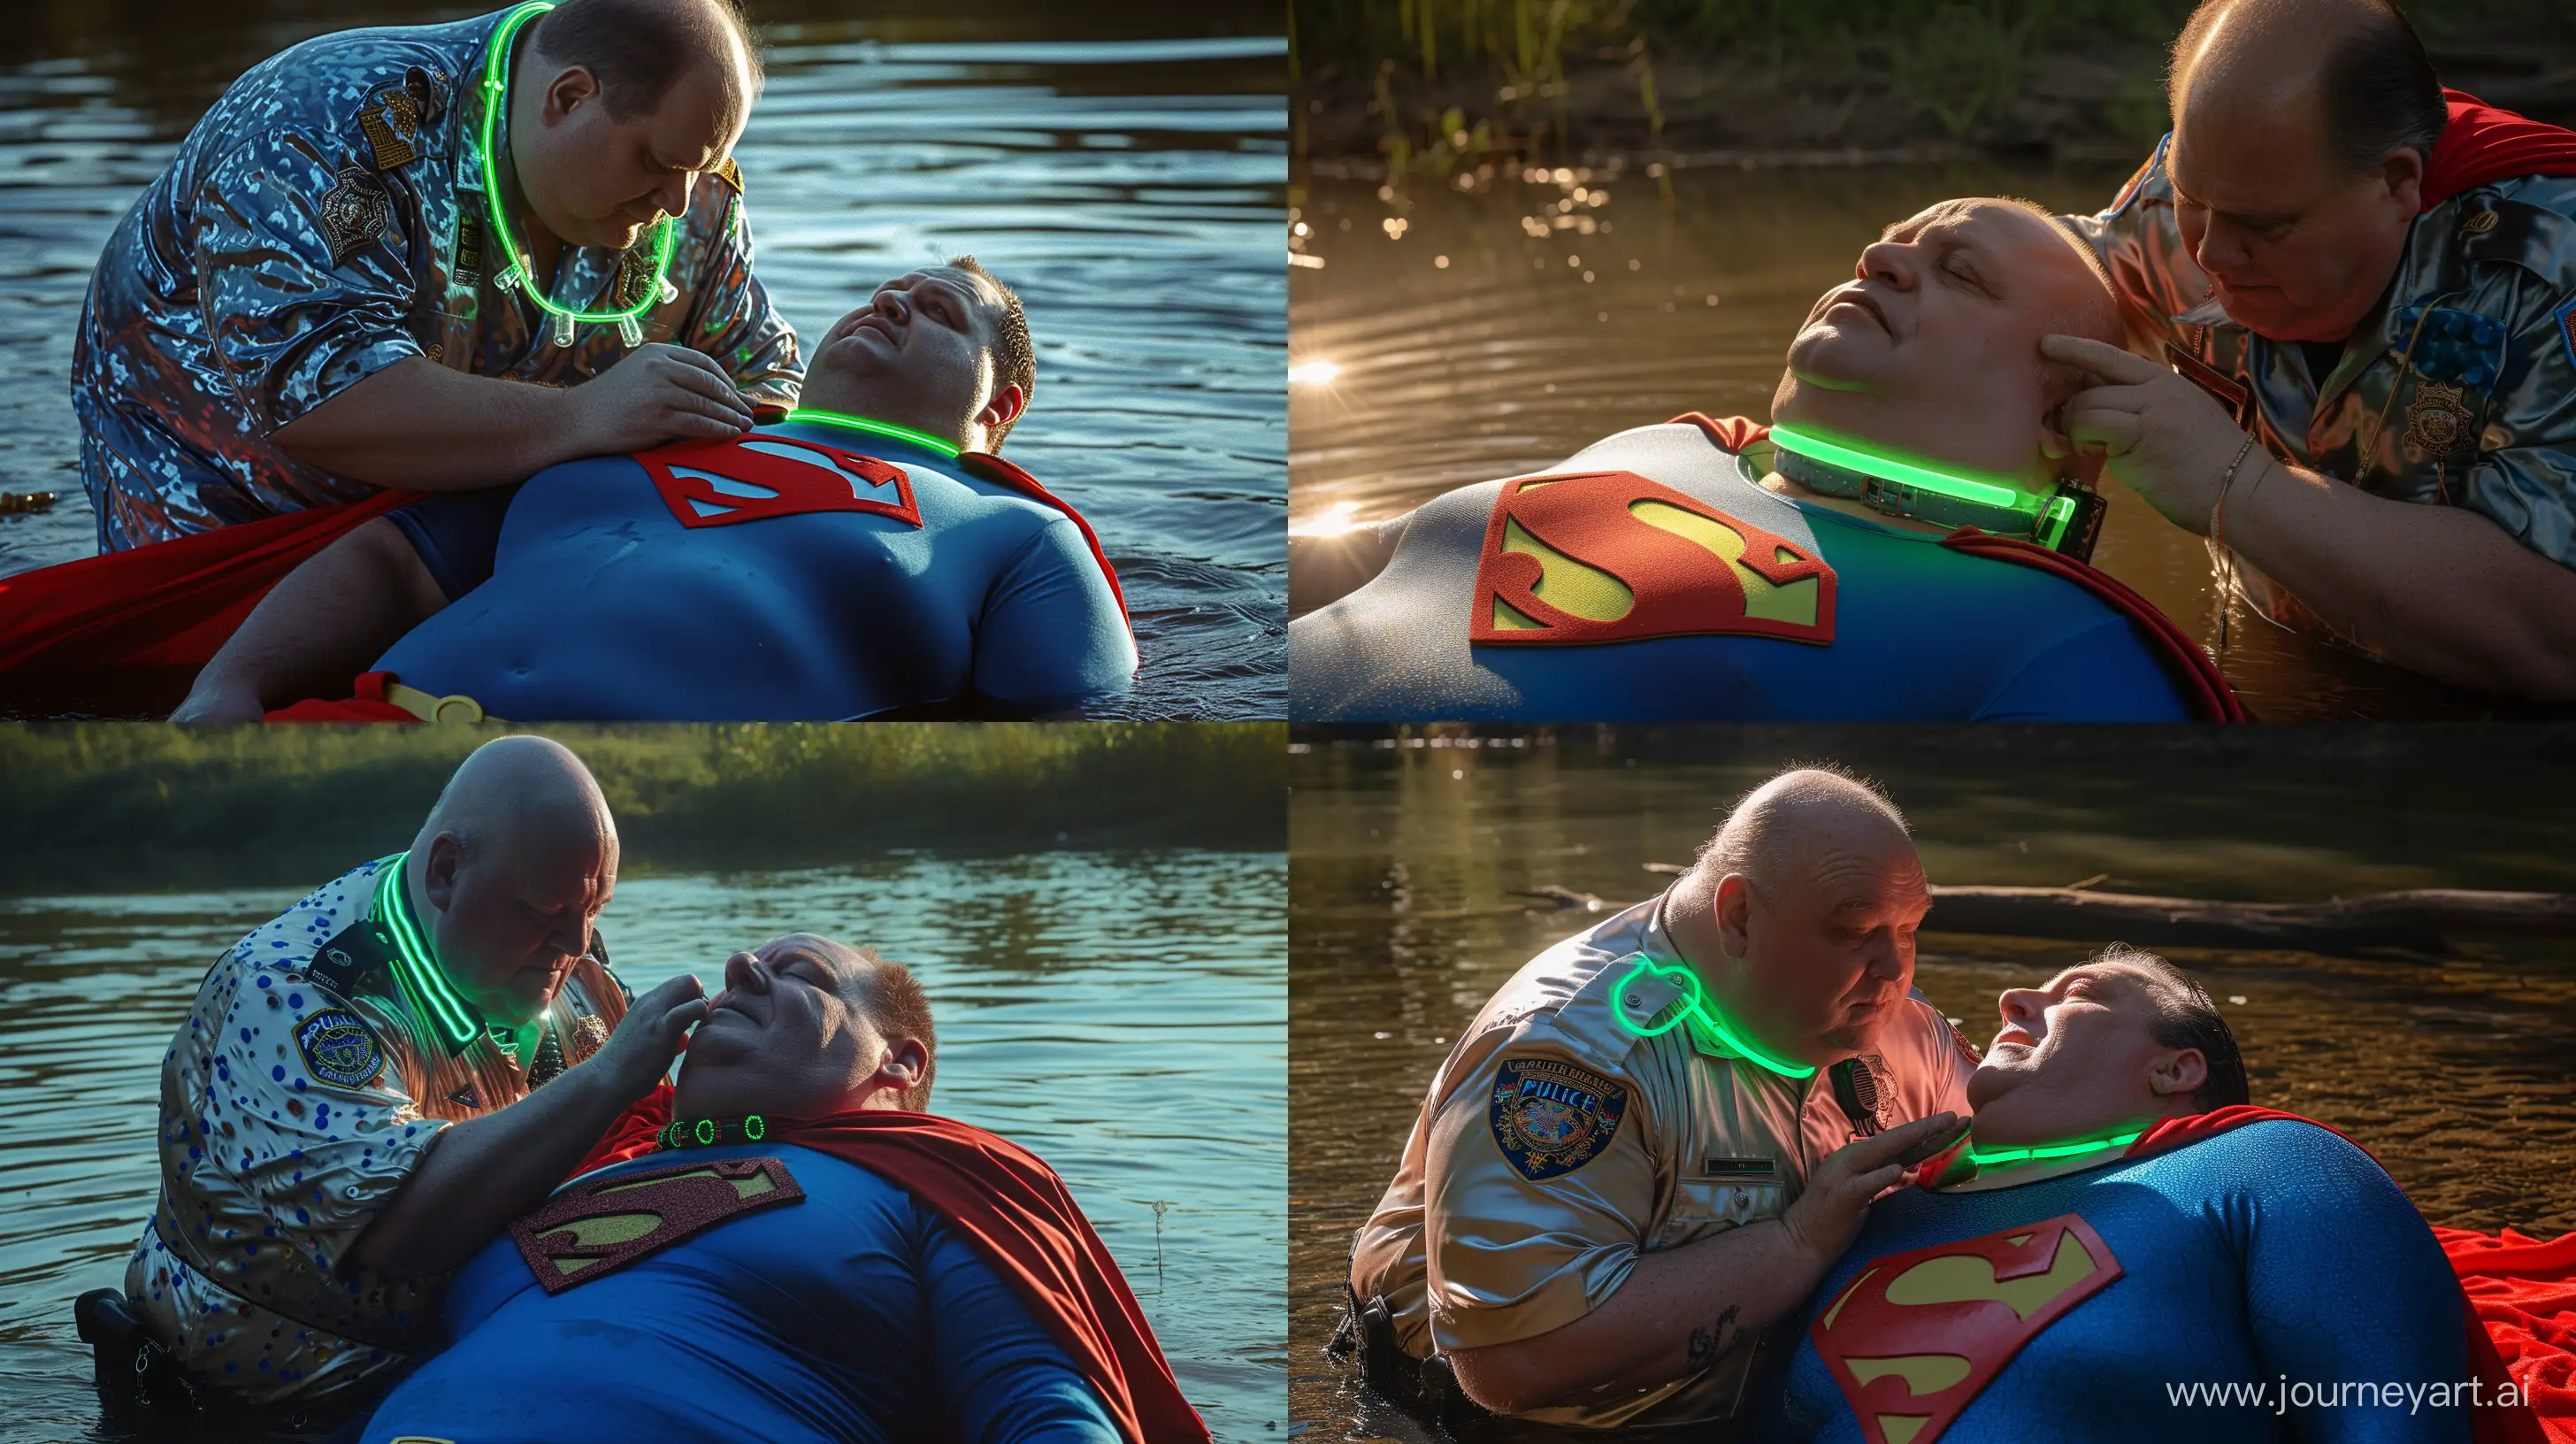 Eccentric-Scene-Senior-Man-in-Superman-Costume-Receives-Glowing-Neon-Dog-Collar-by-the-River